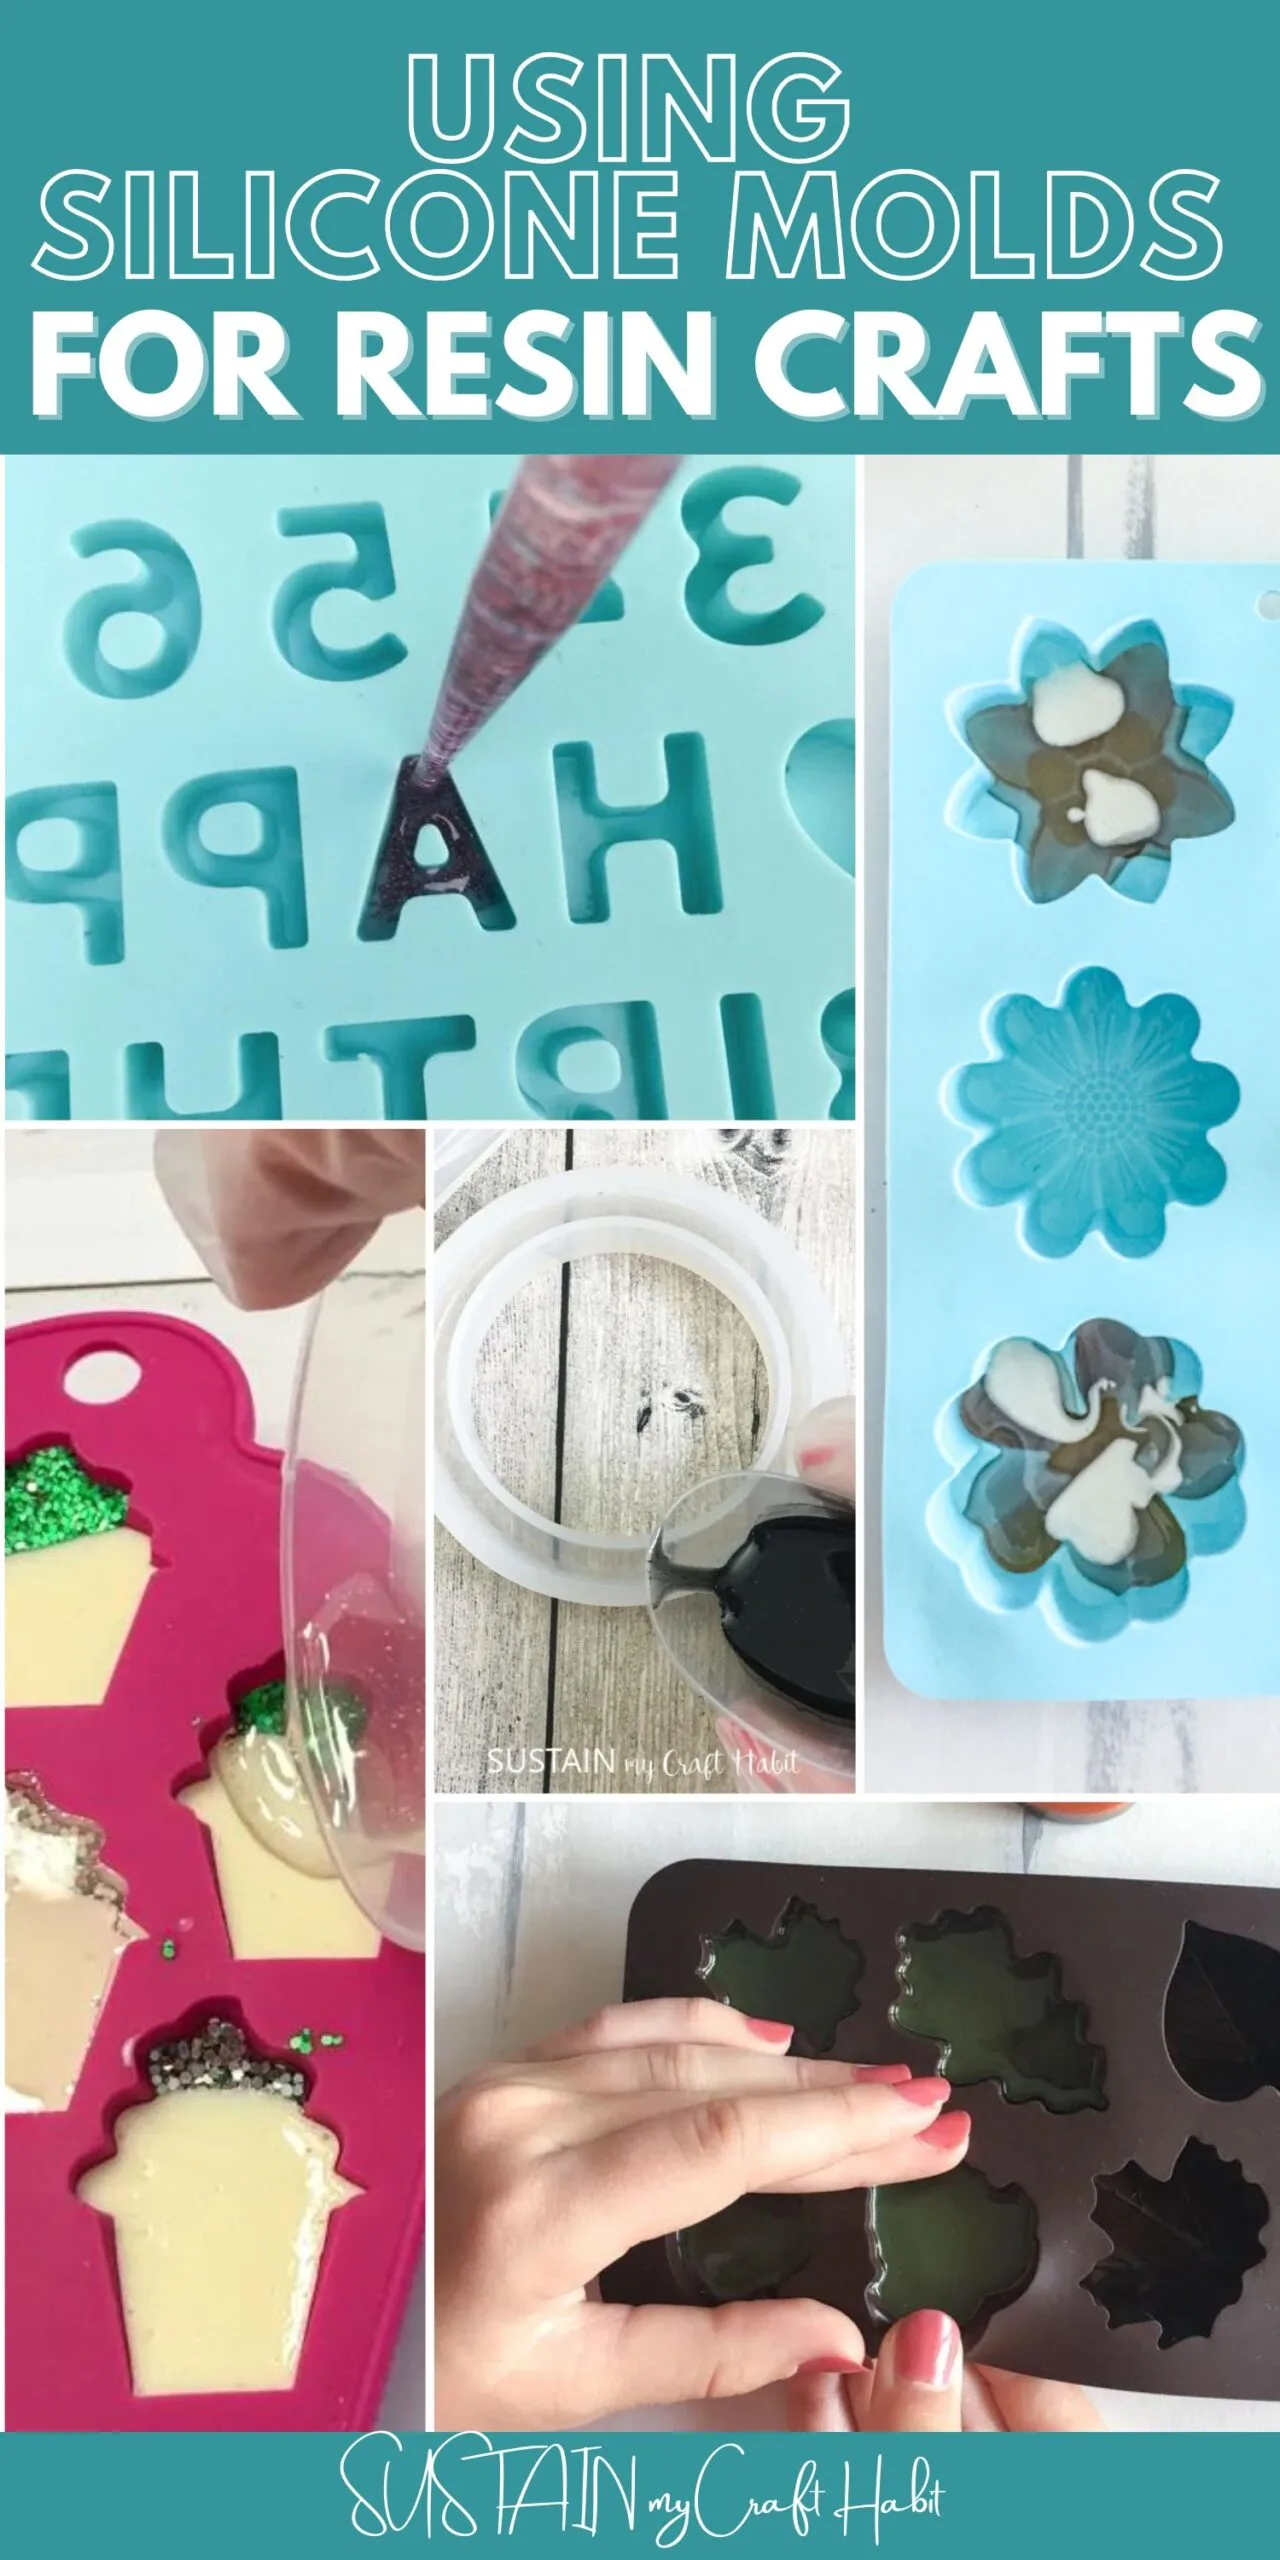 Do Silicone Molds Work for Resin? – Sustain My Craft Habit